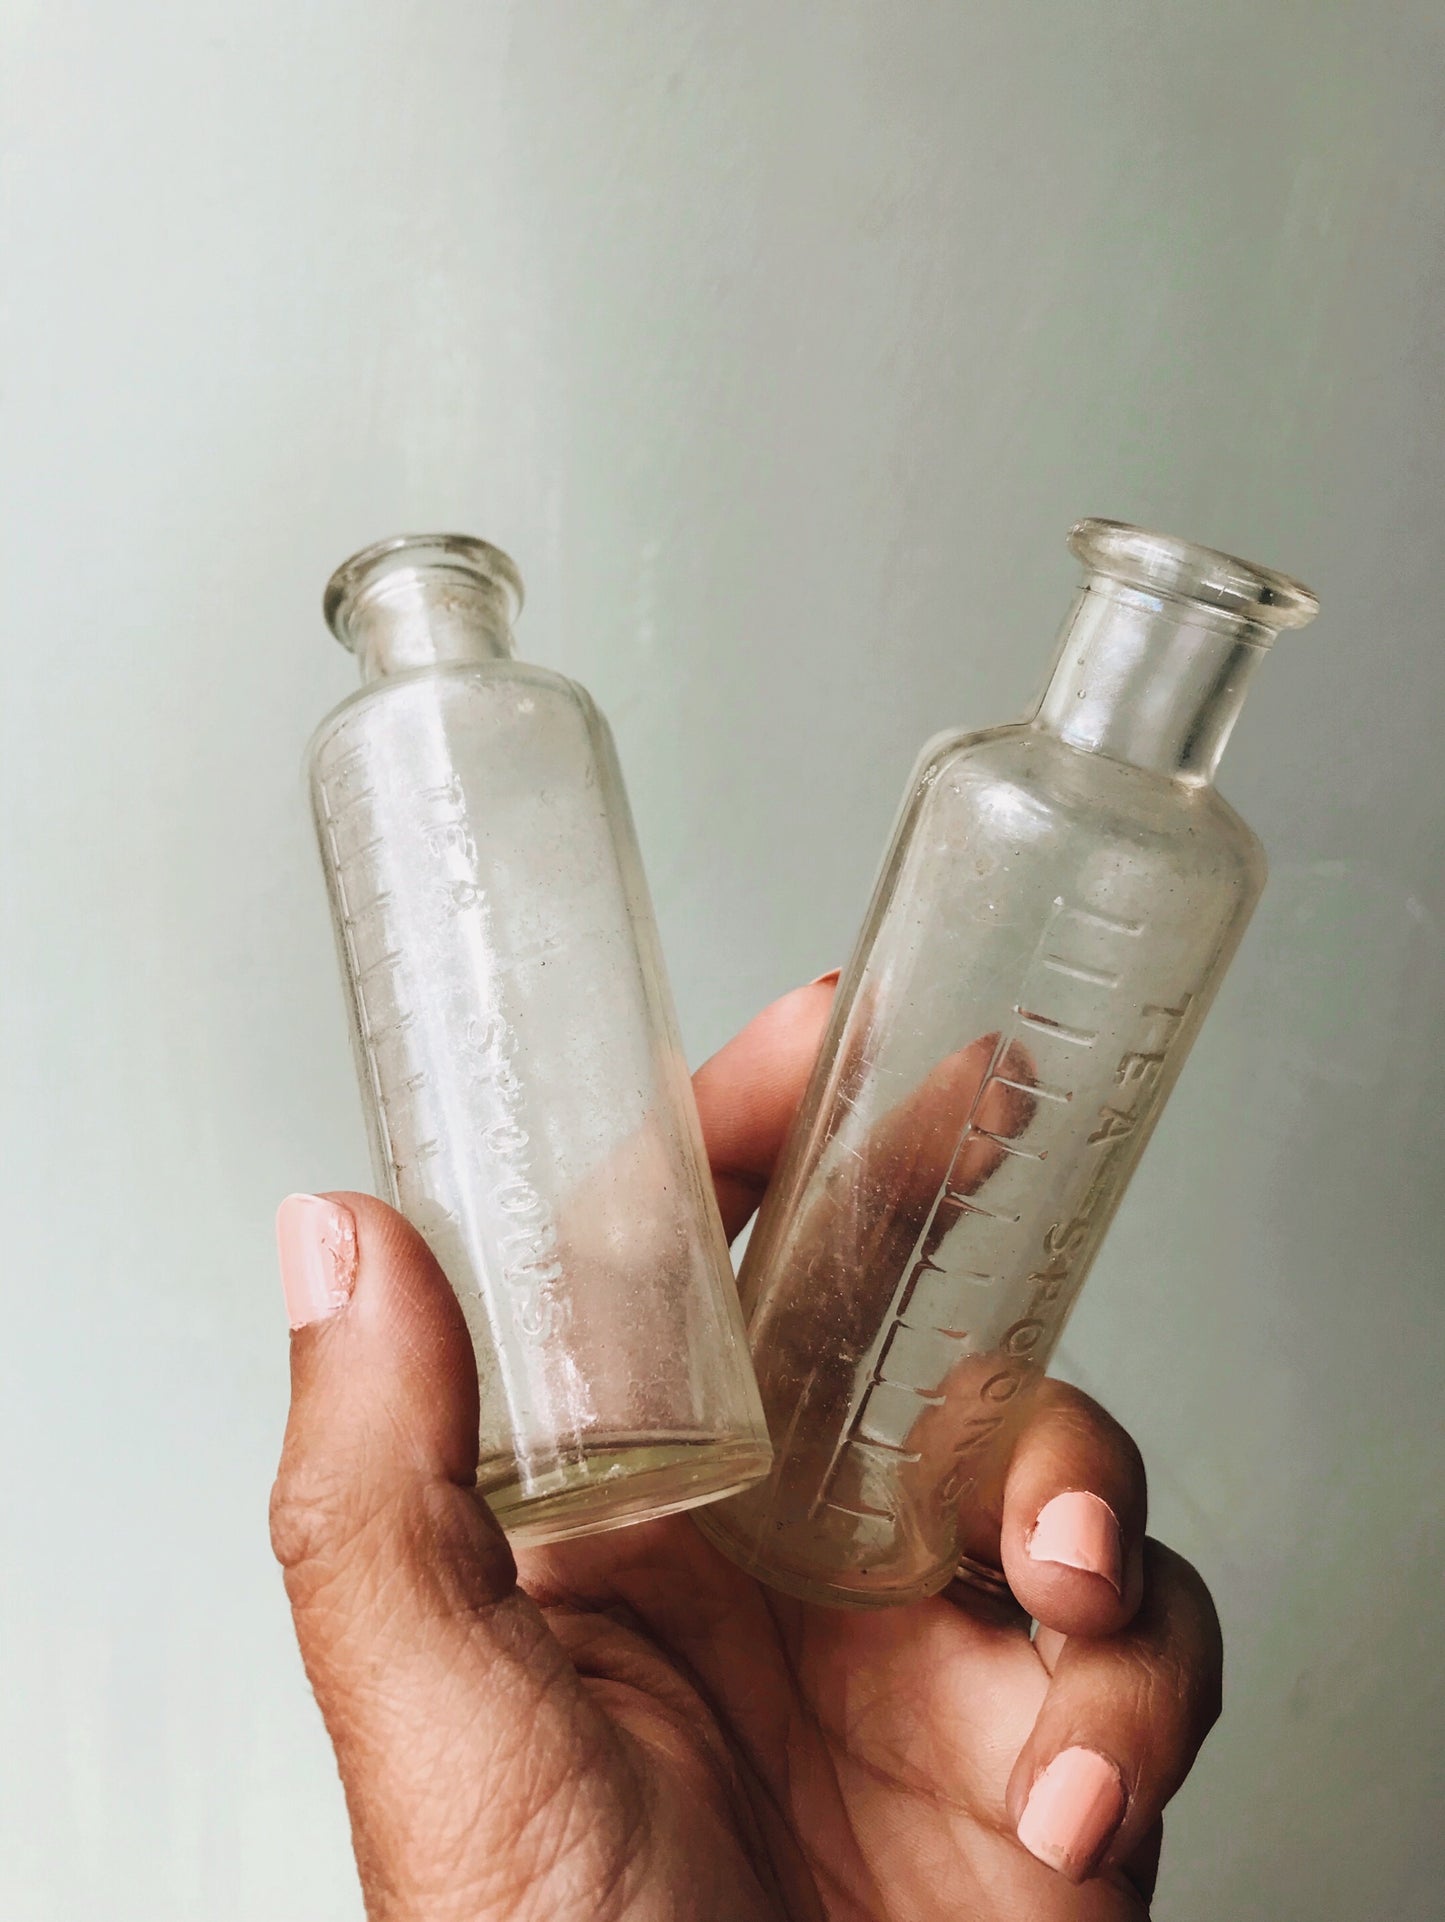 Two Apothecary Spoonful Measuring Bottles